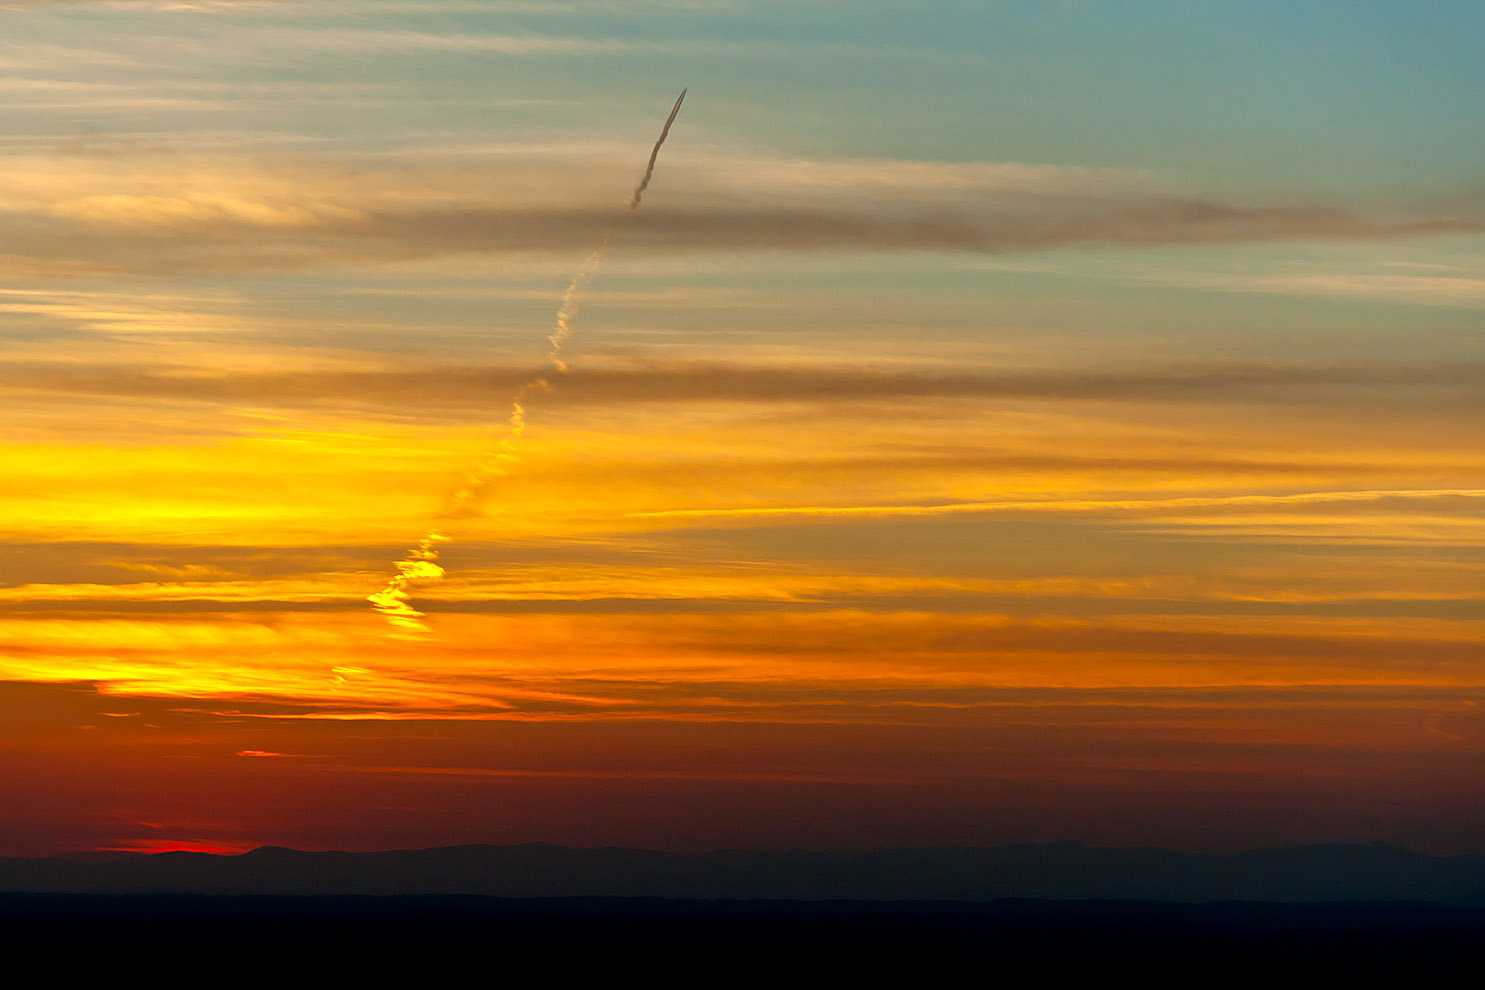 jet trail through clouds at sunset